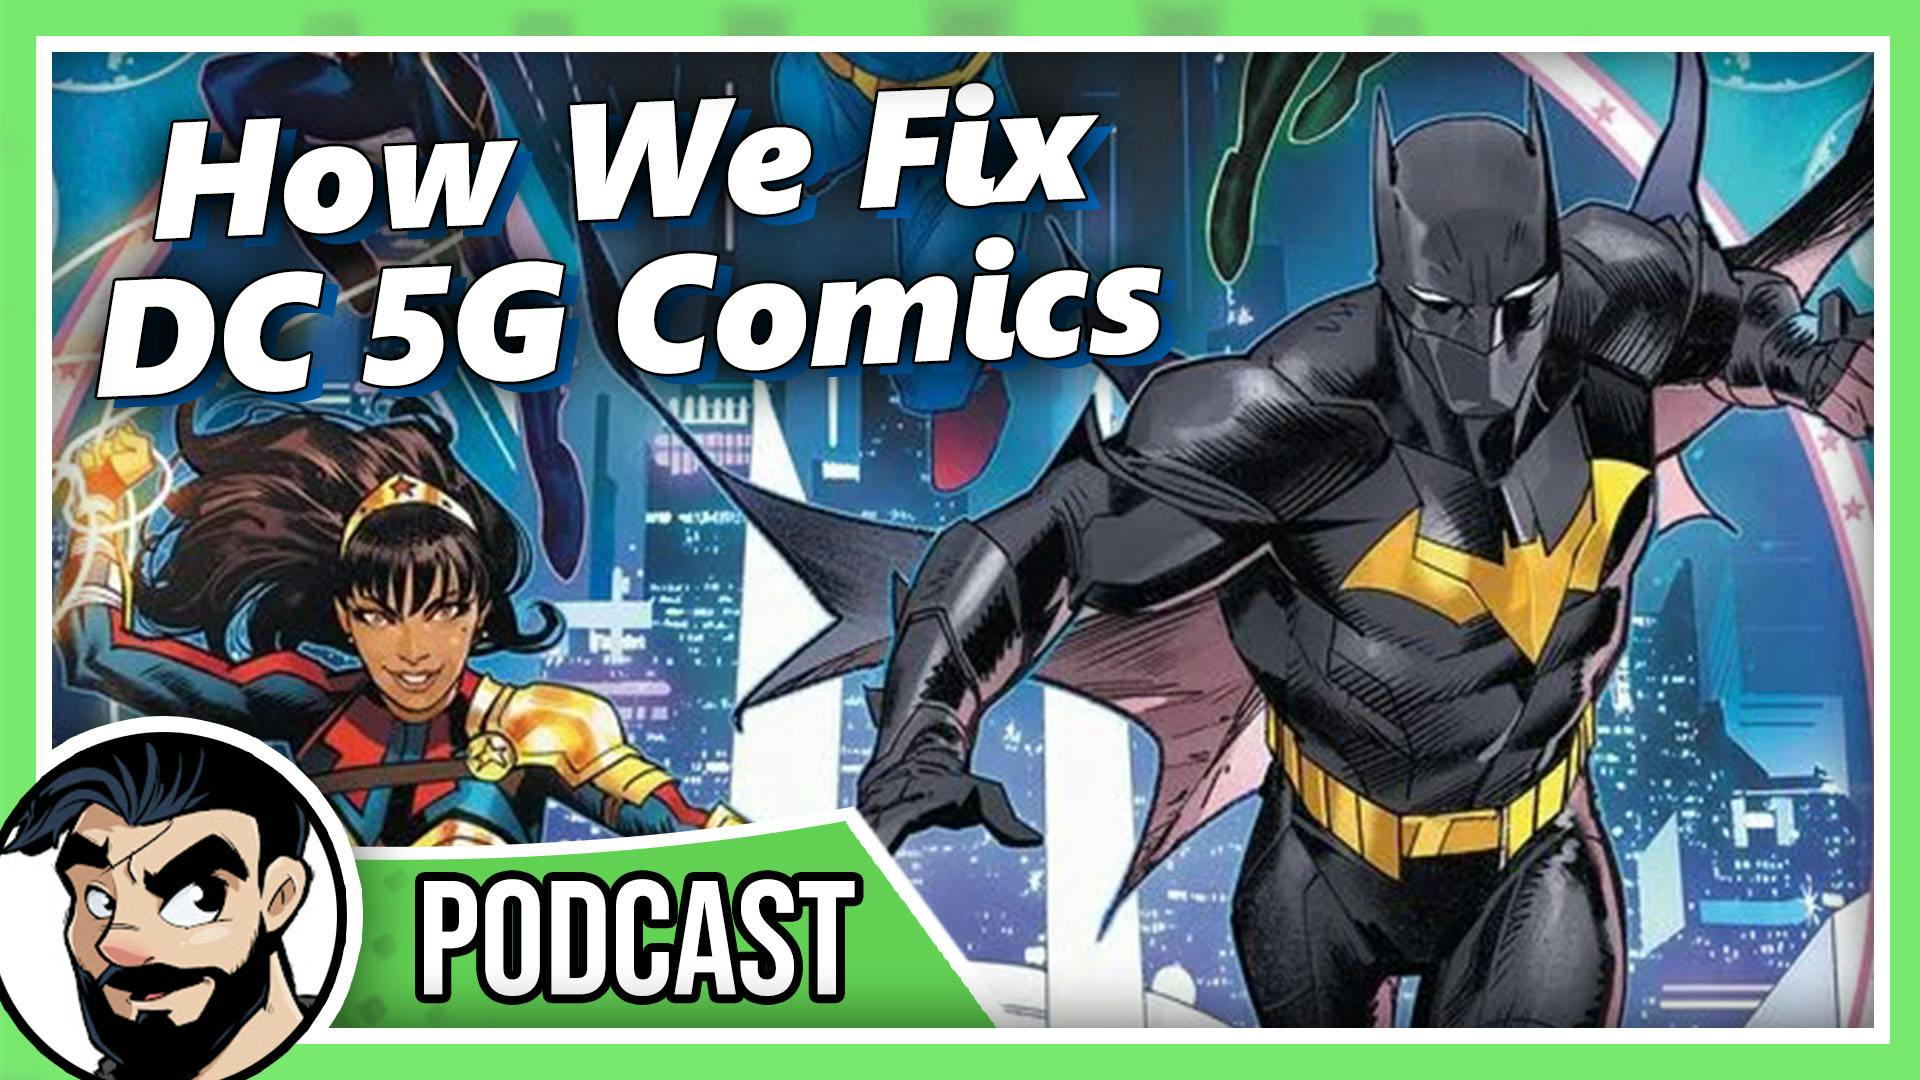 Can We Save DC Comics? By Fixing 5G’s Plans?